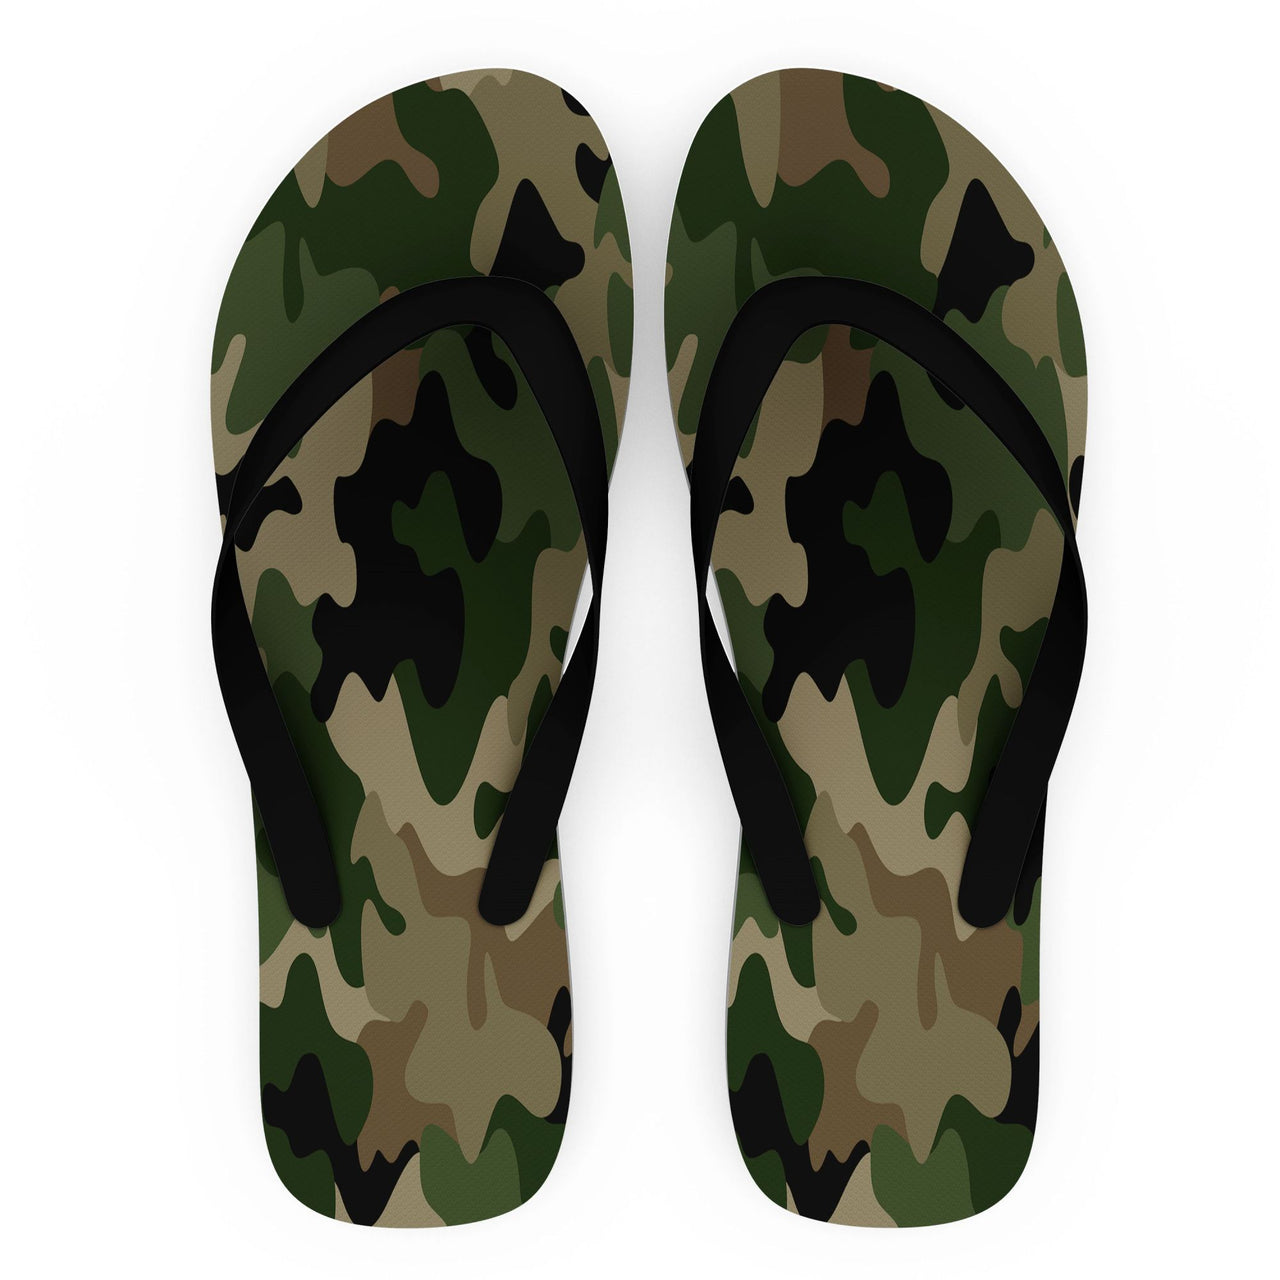 Military Camouflage Army Green Designed Slippers (Flip Flops)